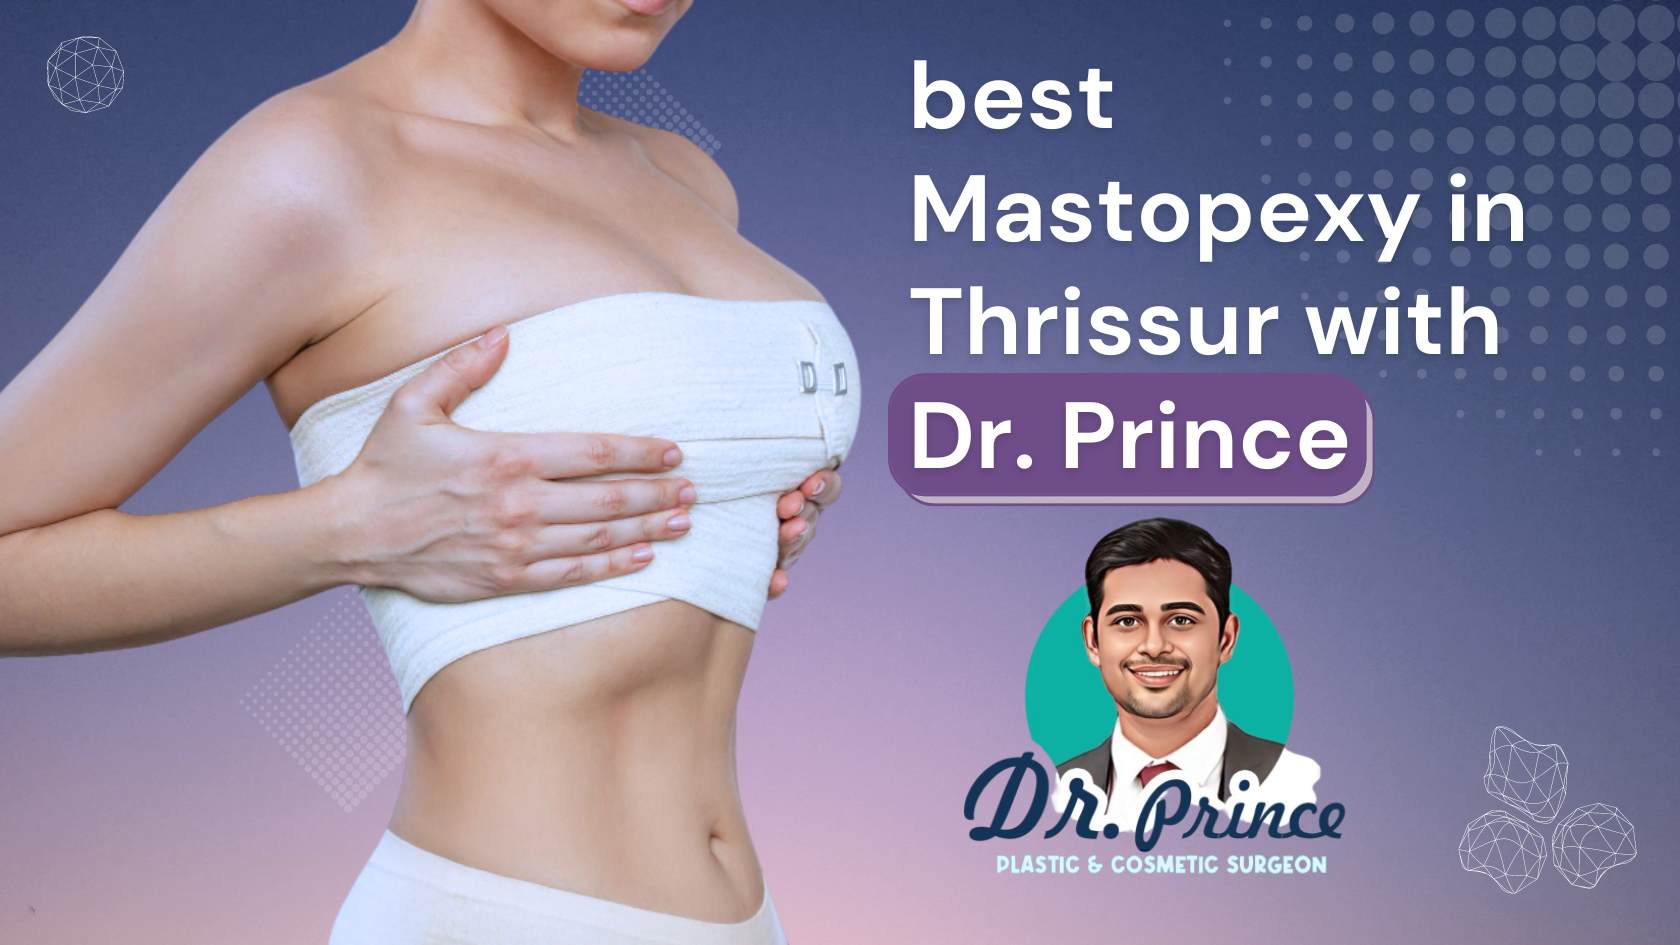 Mastopexy Procedure by Dr. Prince in Thrissur